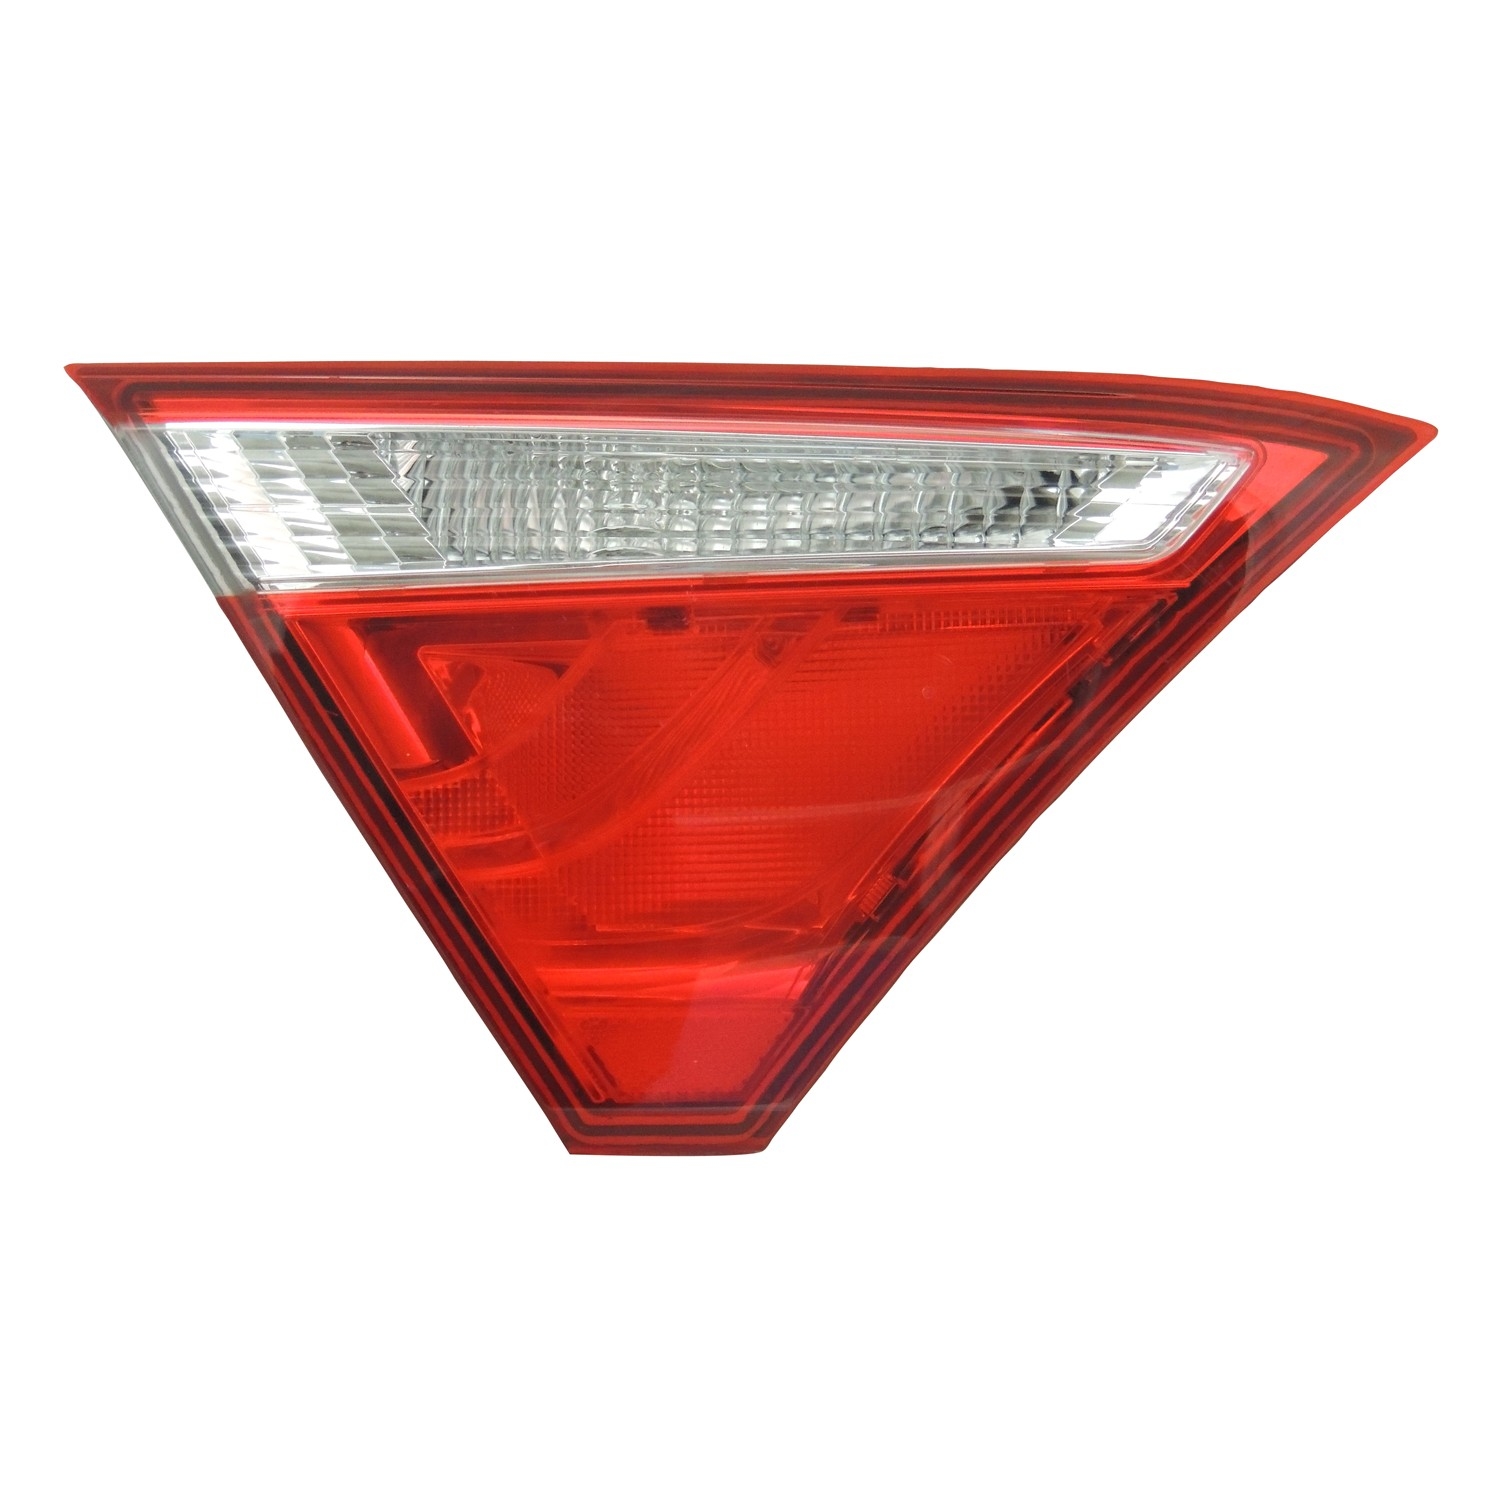 TYC - Capa Certified Tail Light Assembly (Left Inner) - TYC 17-5536-00-9